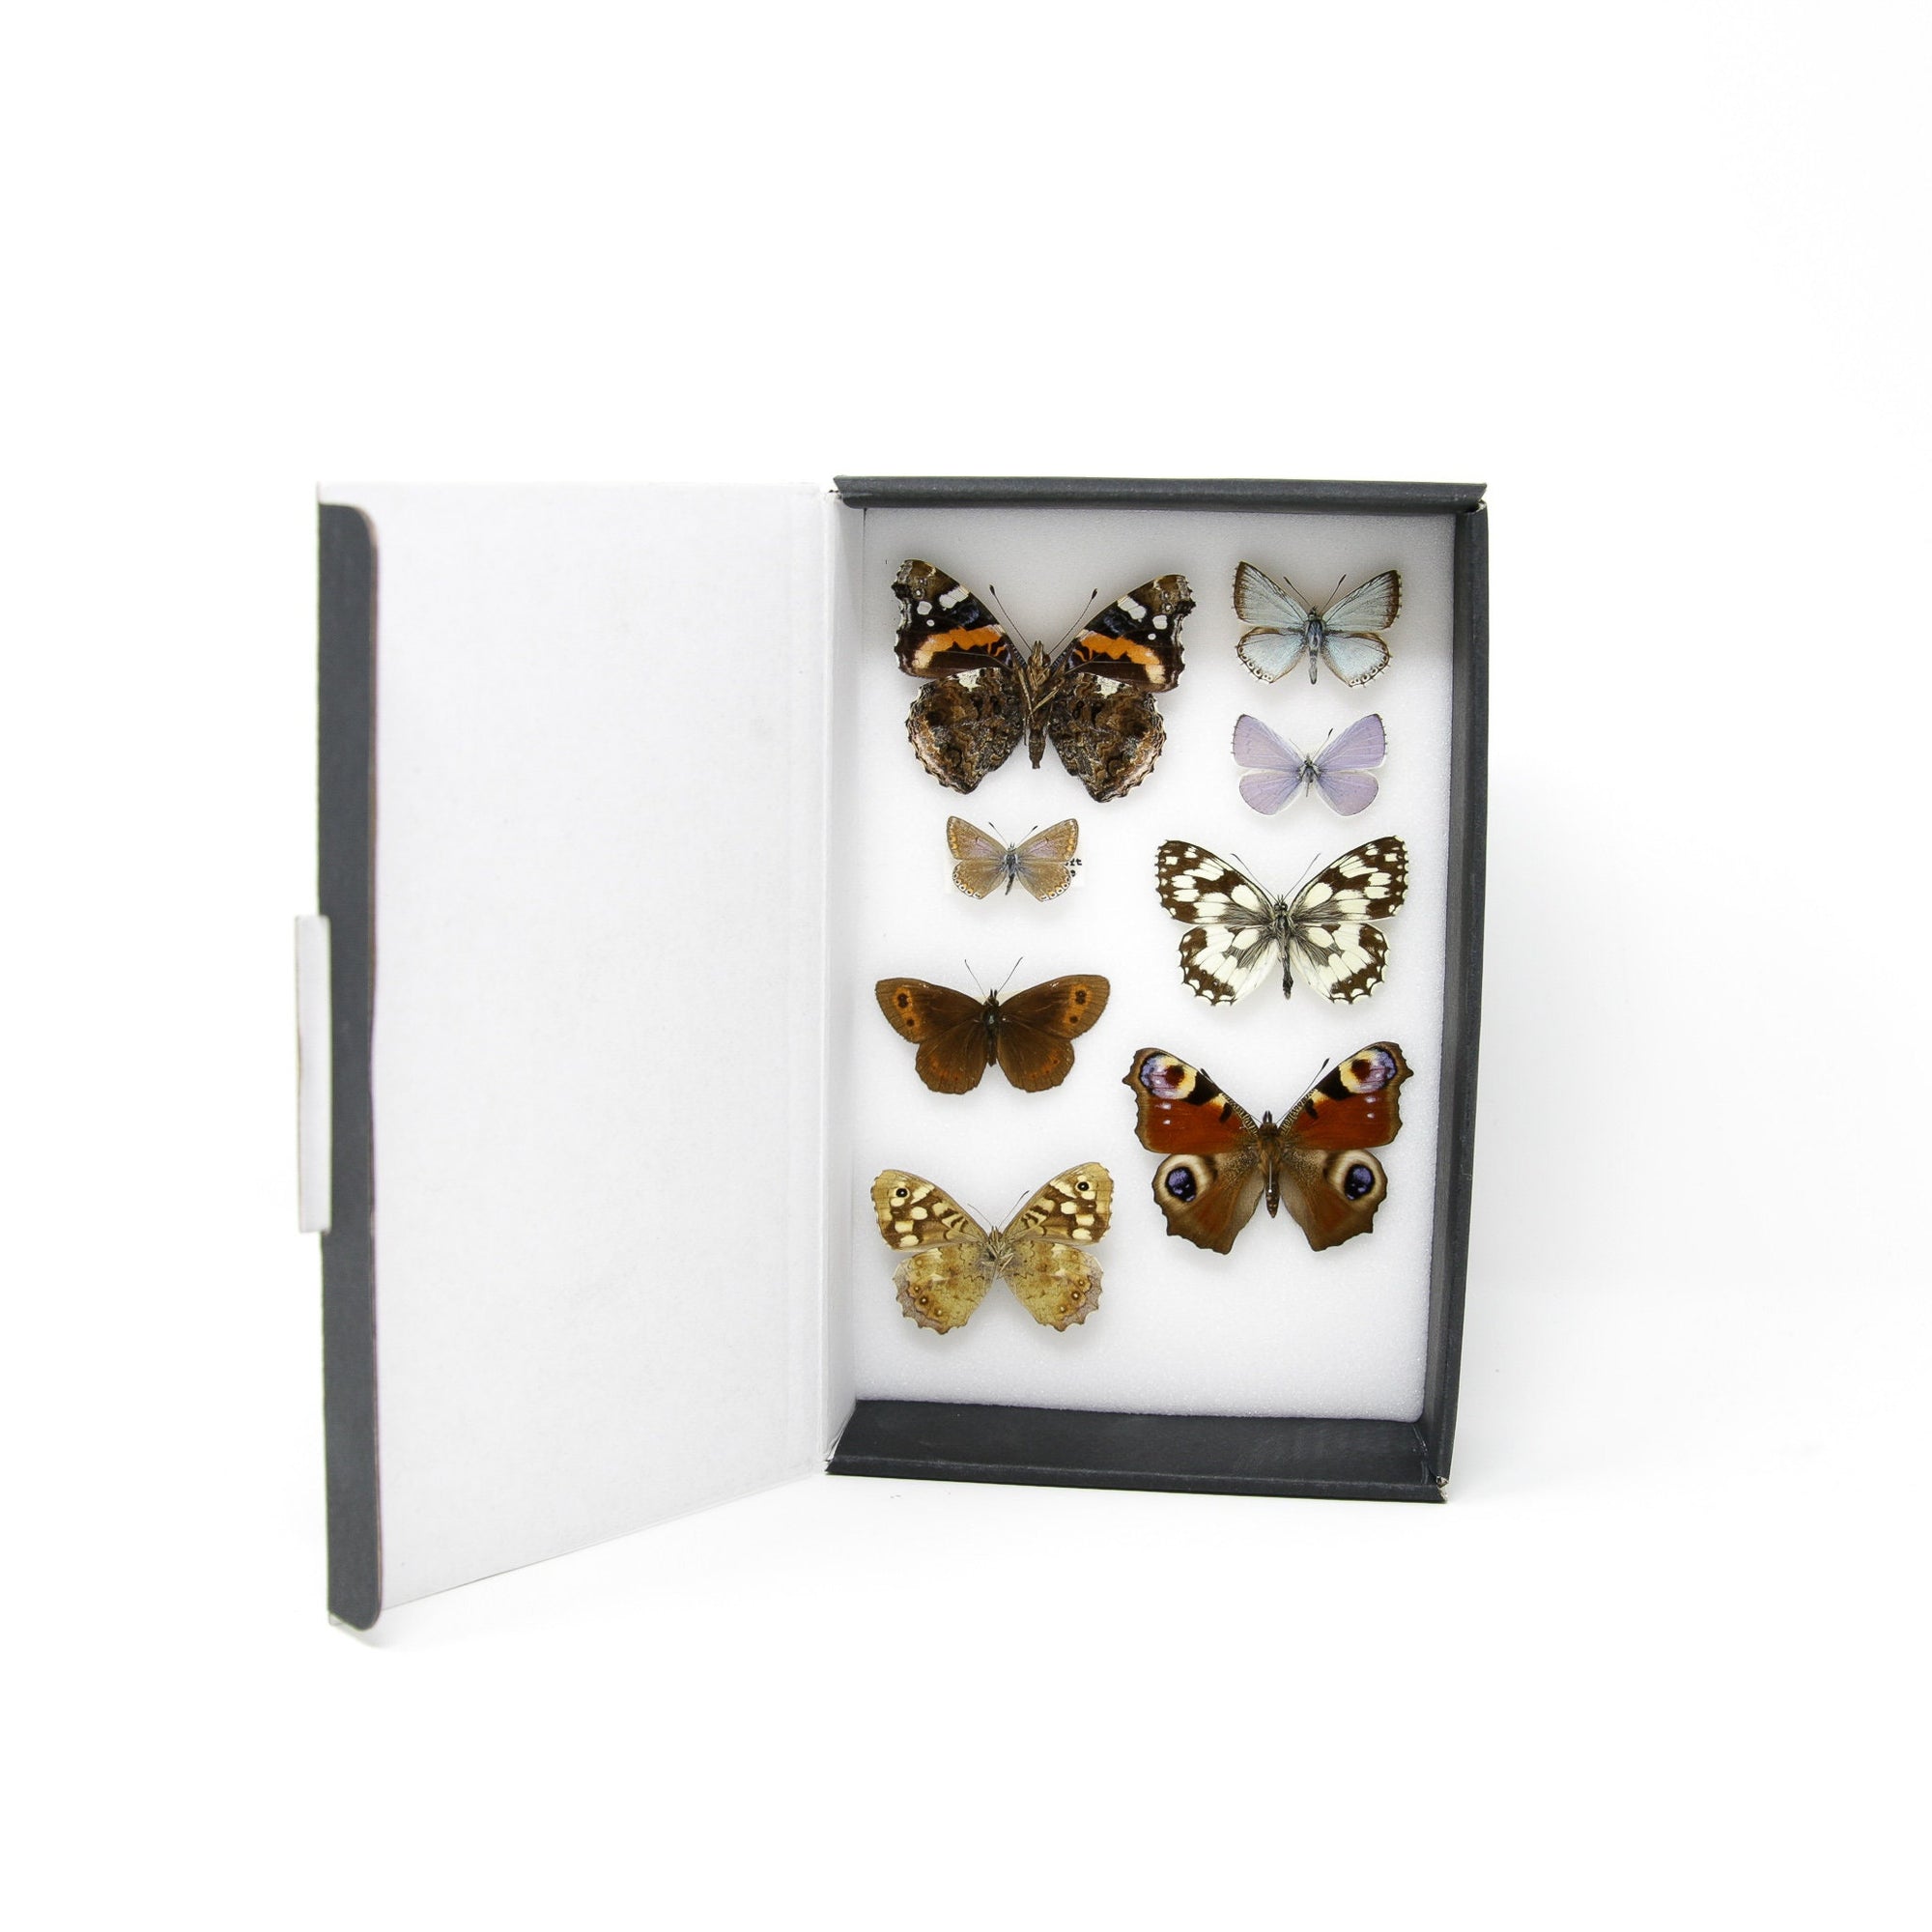 A Collection of Palearctic Butterflies with Scientific Collection Data, A1 Quality, Entomology, Real Lepidoptera Specimens #SE12